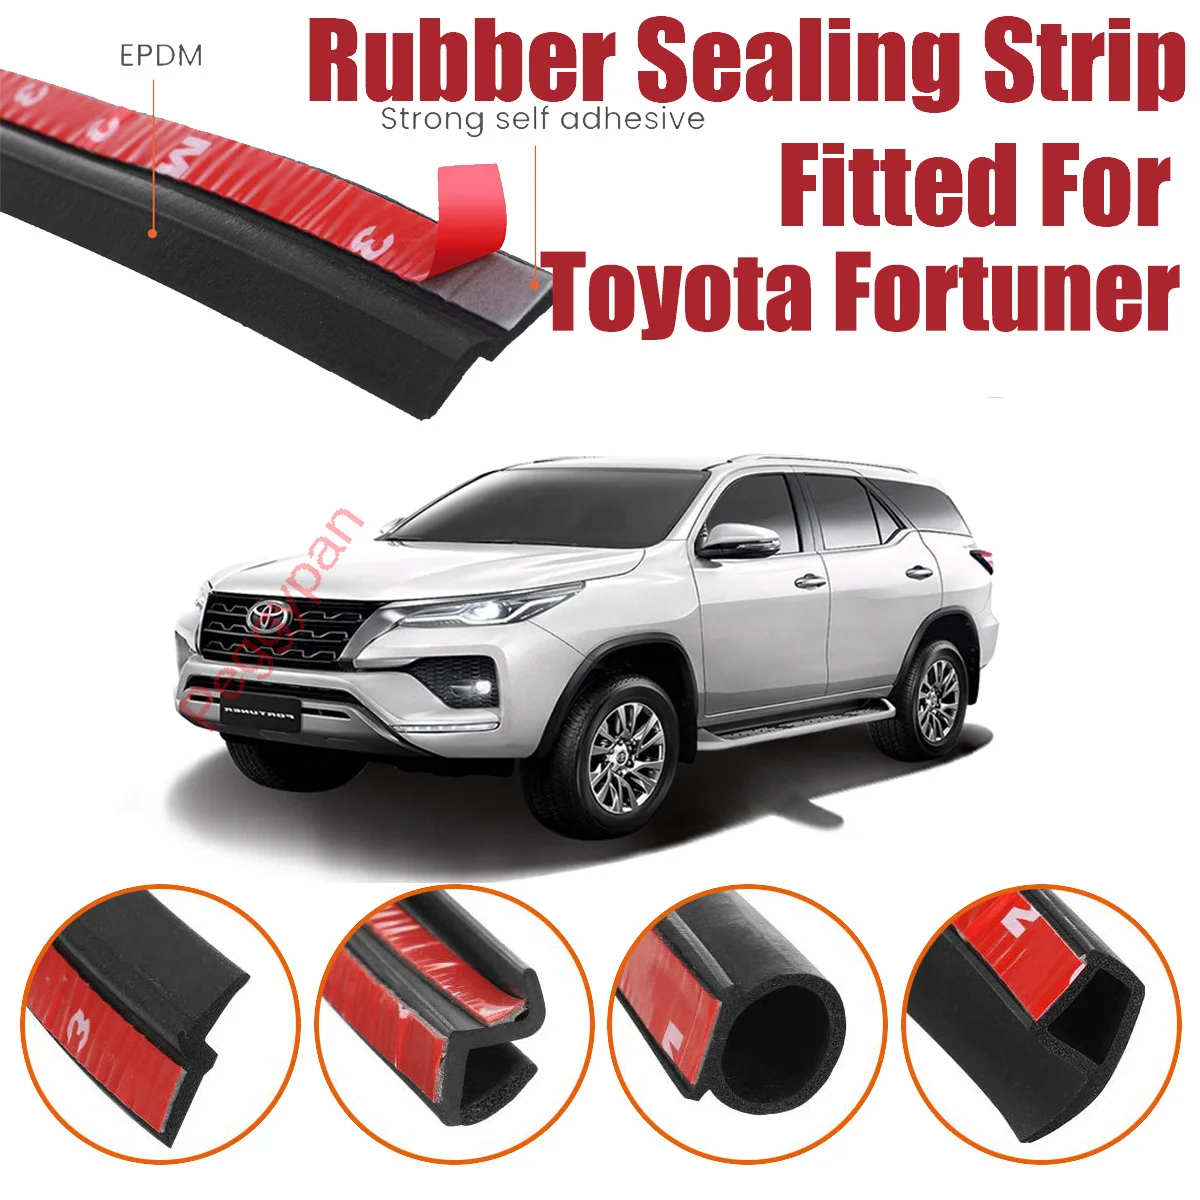 Door Seal Strip Kit Self Adhesive Window Engine Cover Soundproof Rubber Weather Draft Wind Noise Reduction For Toyota Fortuner